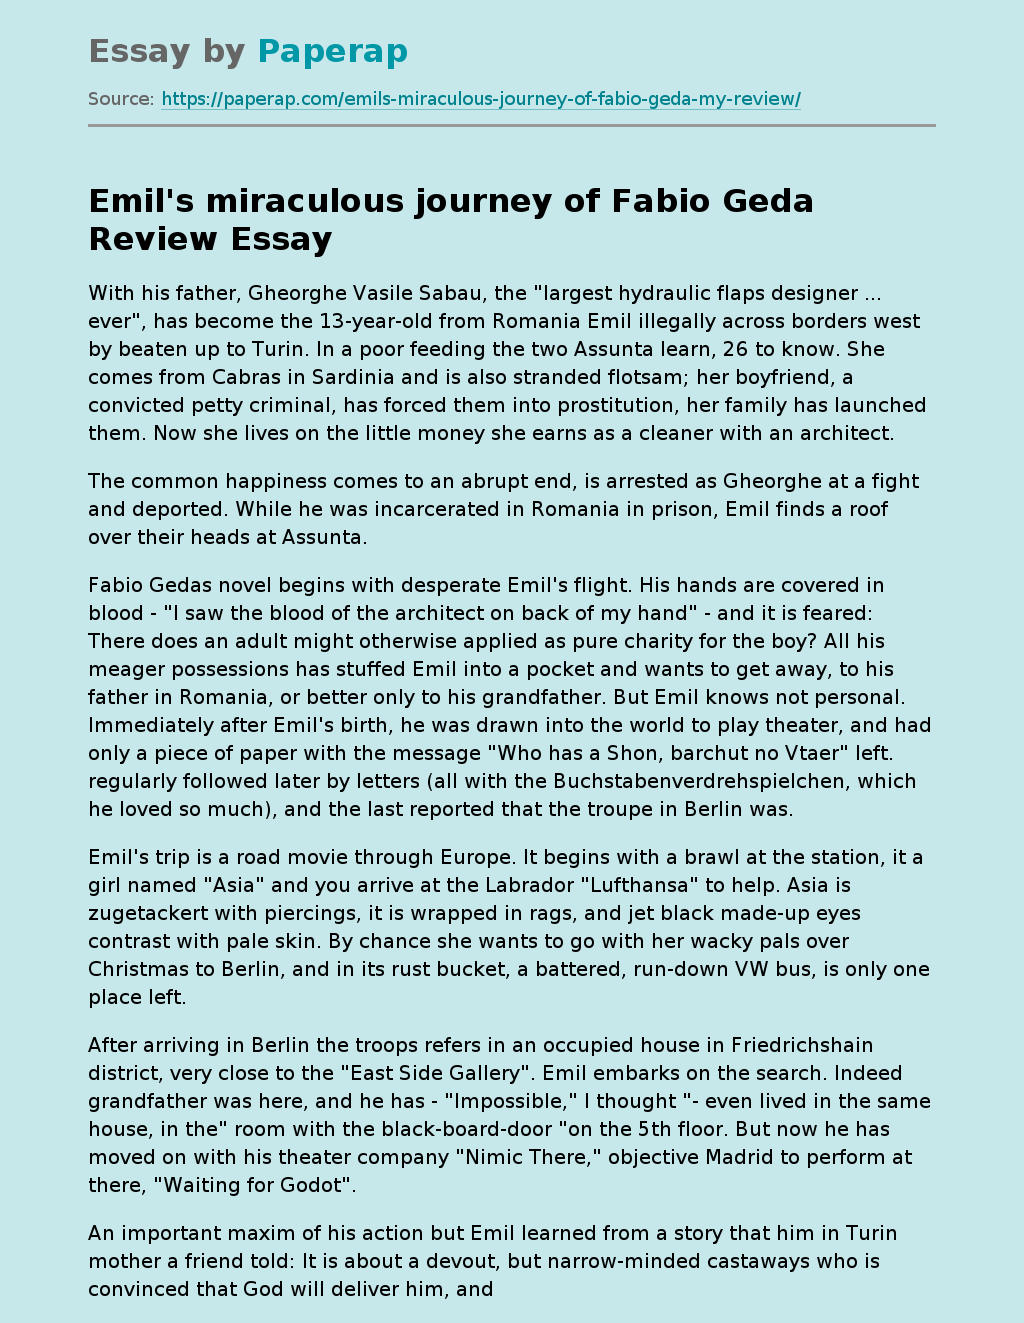 Emil's Miraculous Journey Of Fabio Geda Review